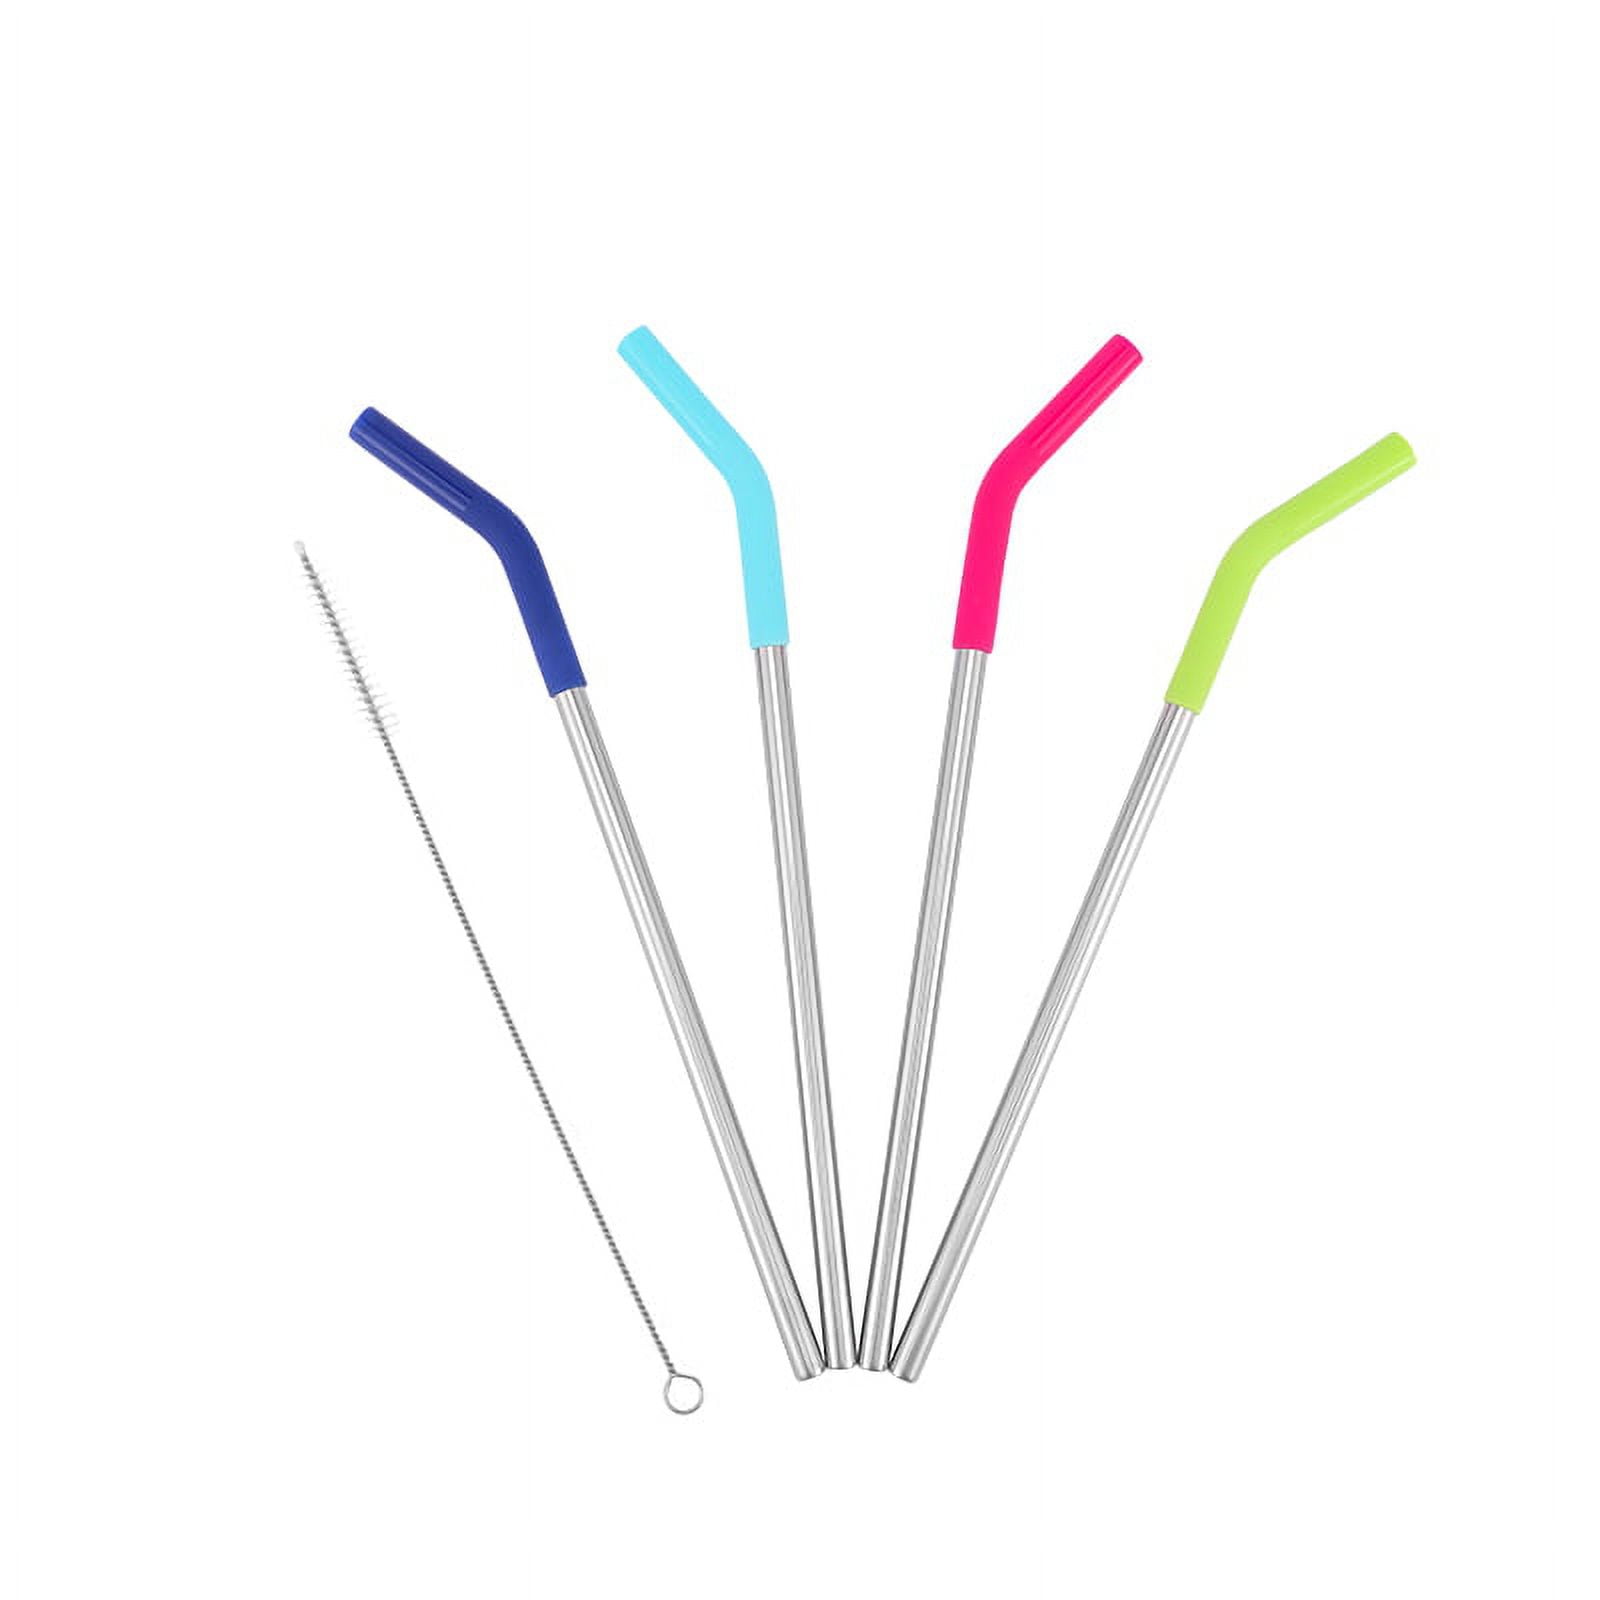 Mainstays Stainless Steel Straw Set, TEAL, TROPICAL BLOSSOM, SCUBA LIME,  STADIUM BLUE 